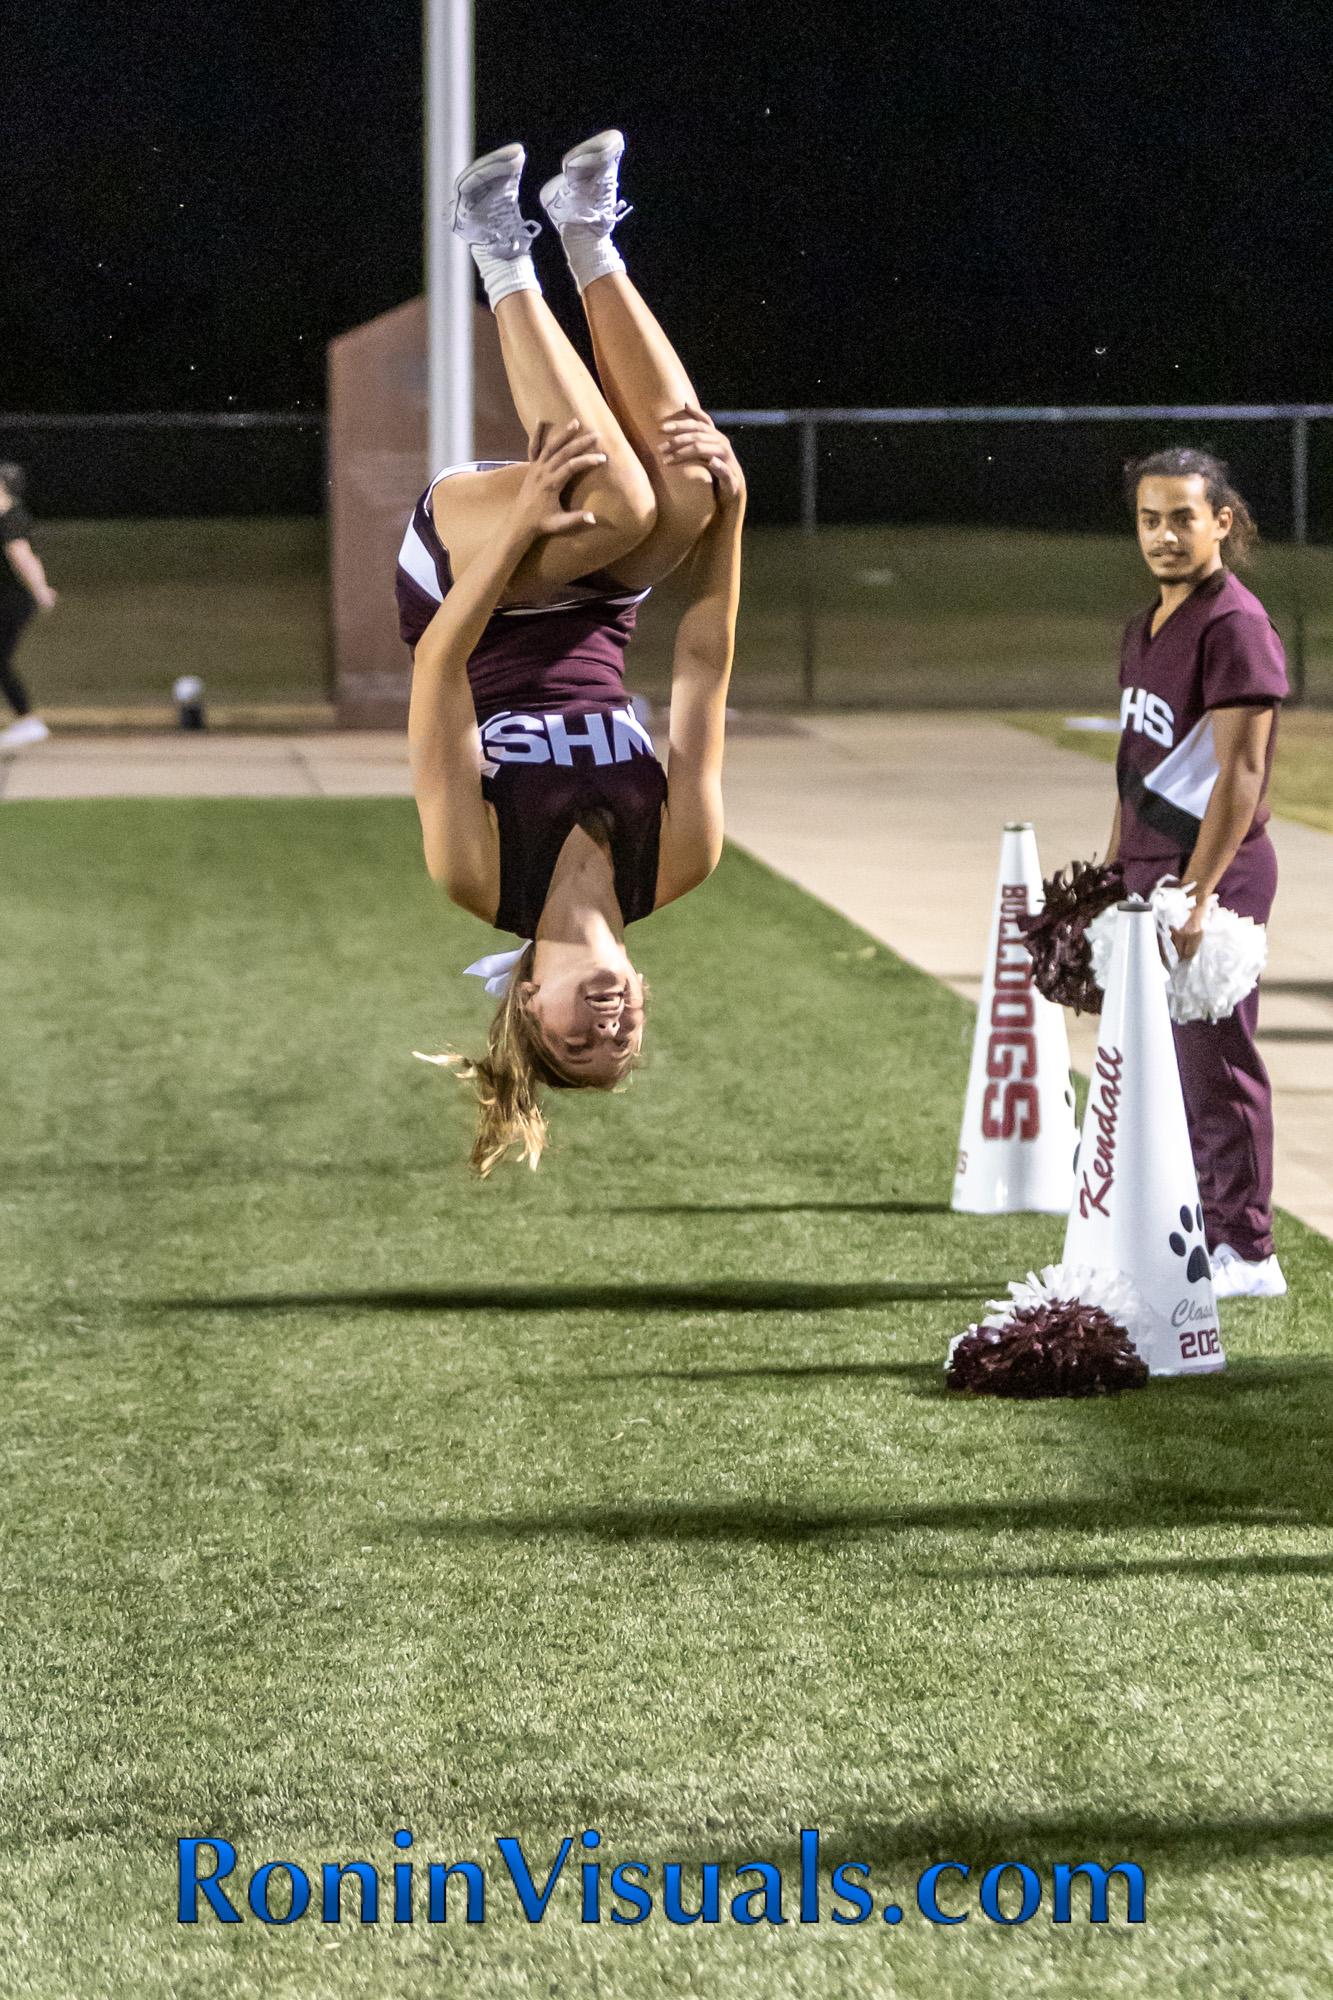 Macy Moffitt, a varsity cheerleader, backflips on the sidelines of the season opener last Friday night. The Waller Bulldog varsity team battles the Bryan Vikings, with the 21-6 decision favoring the Vikings. The Bulldogs next game will be against Mayde Creek in Katy ISD's Legacy Stadium. (photo courtesy RoninVisuals.com)